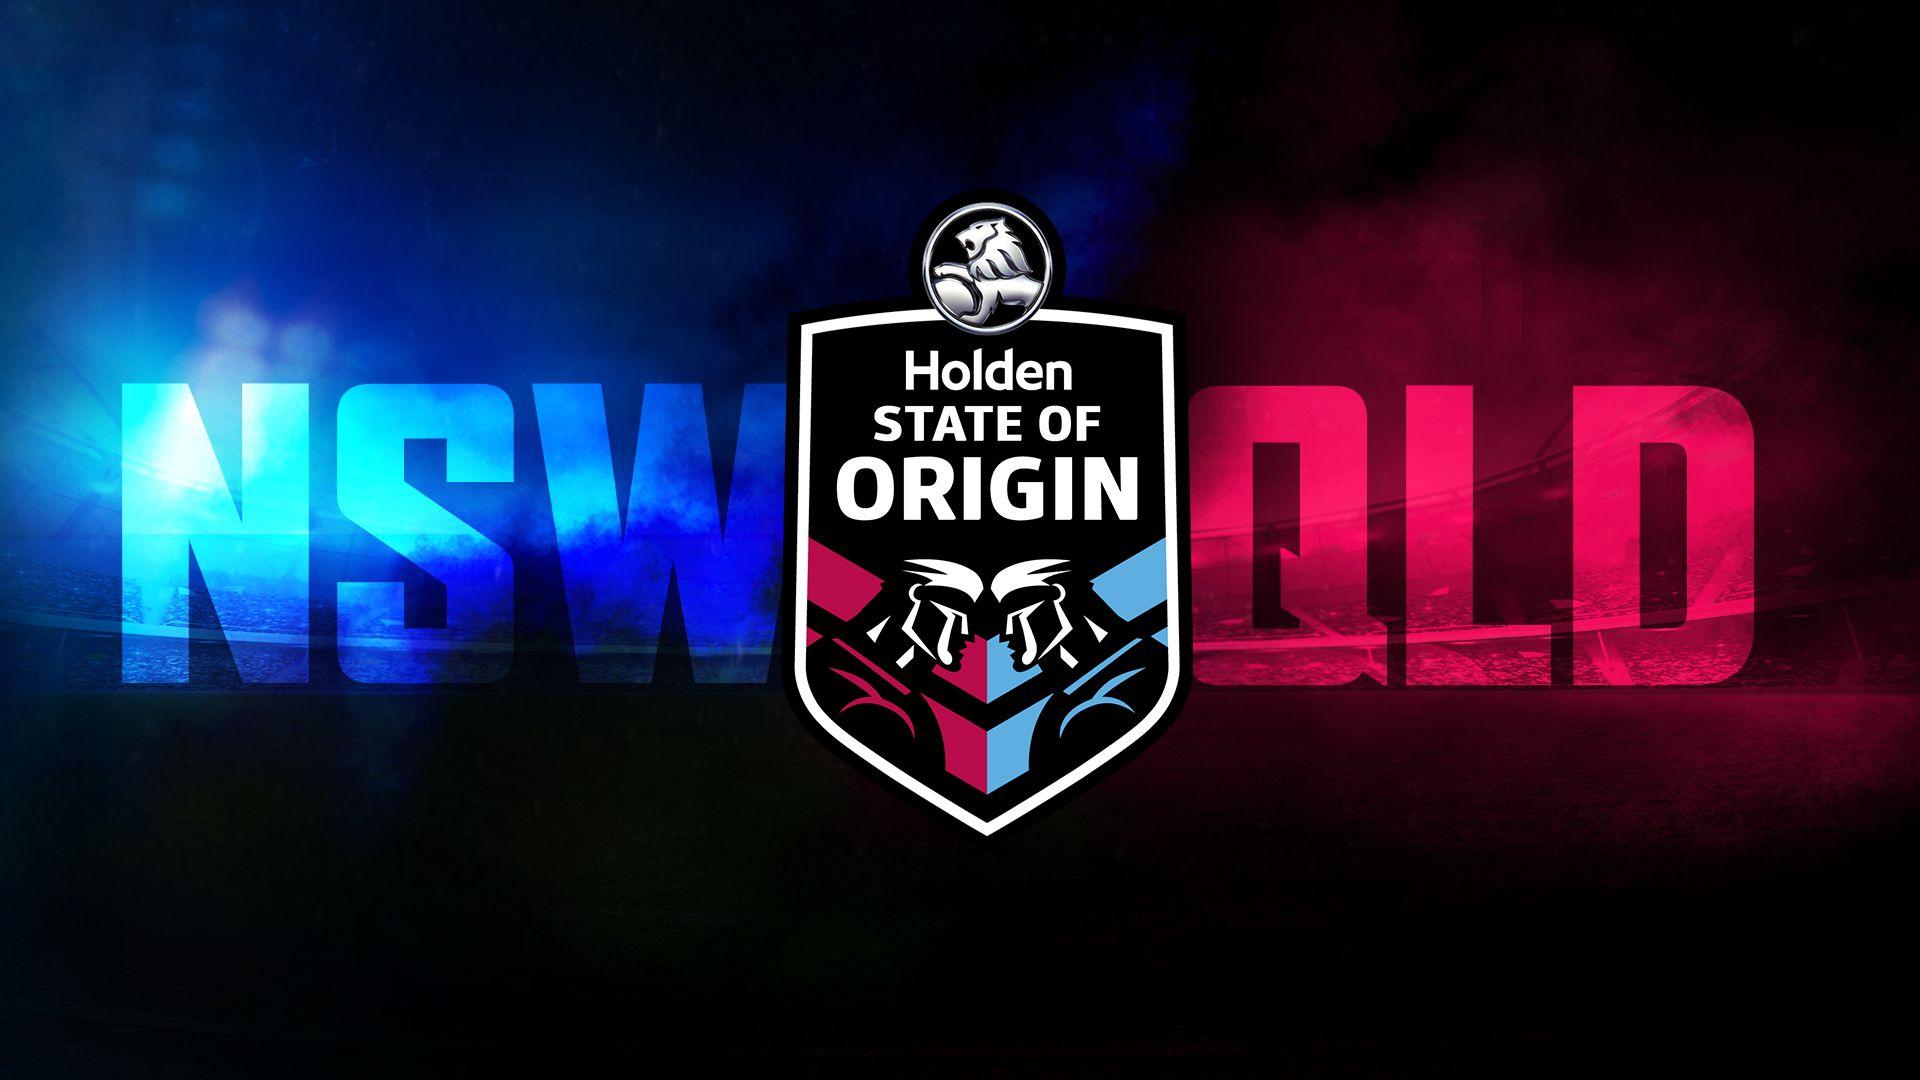 State of Origin Wallpapers - Top Free State of Origin Backgrounds